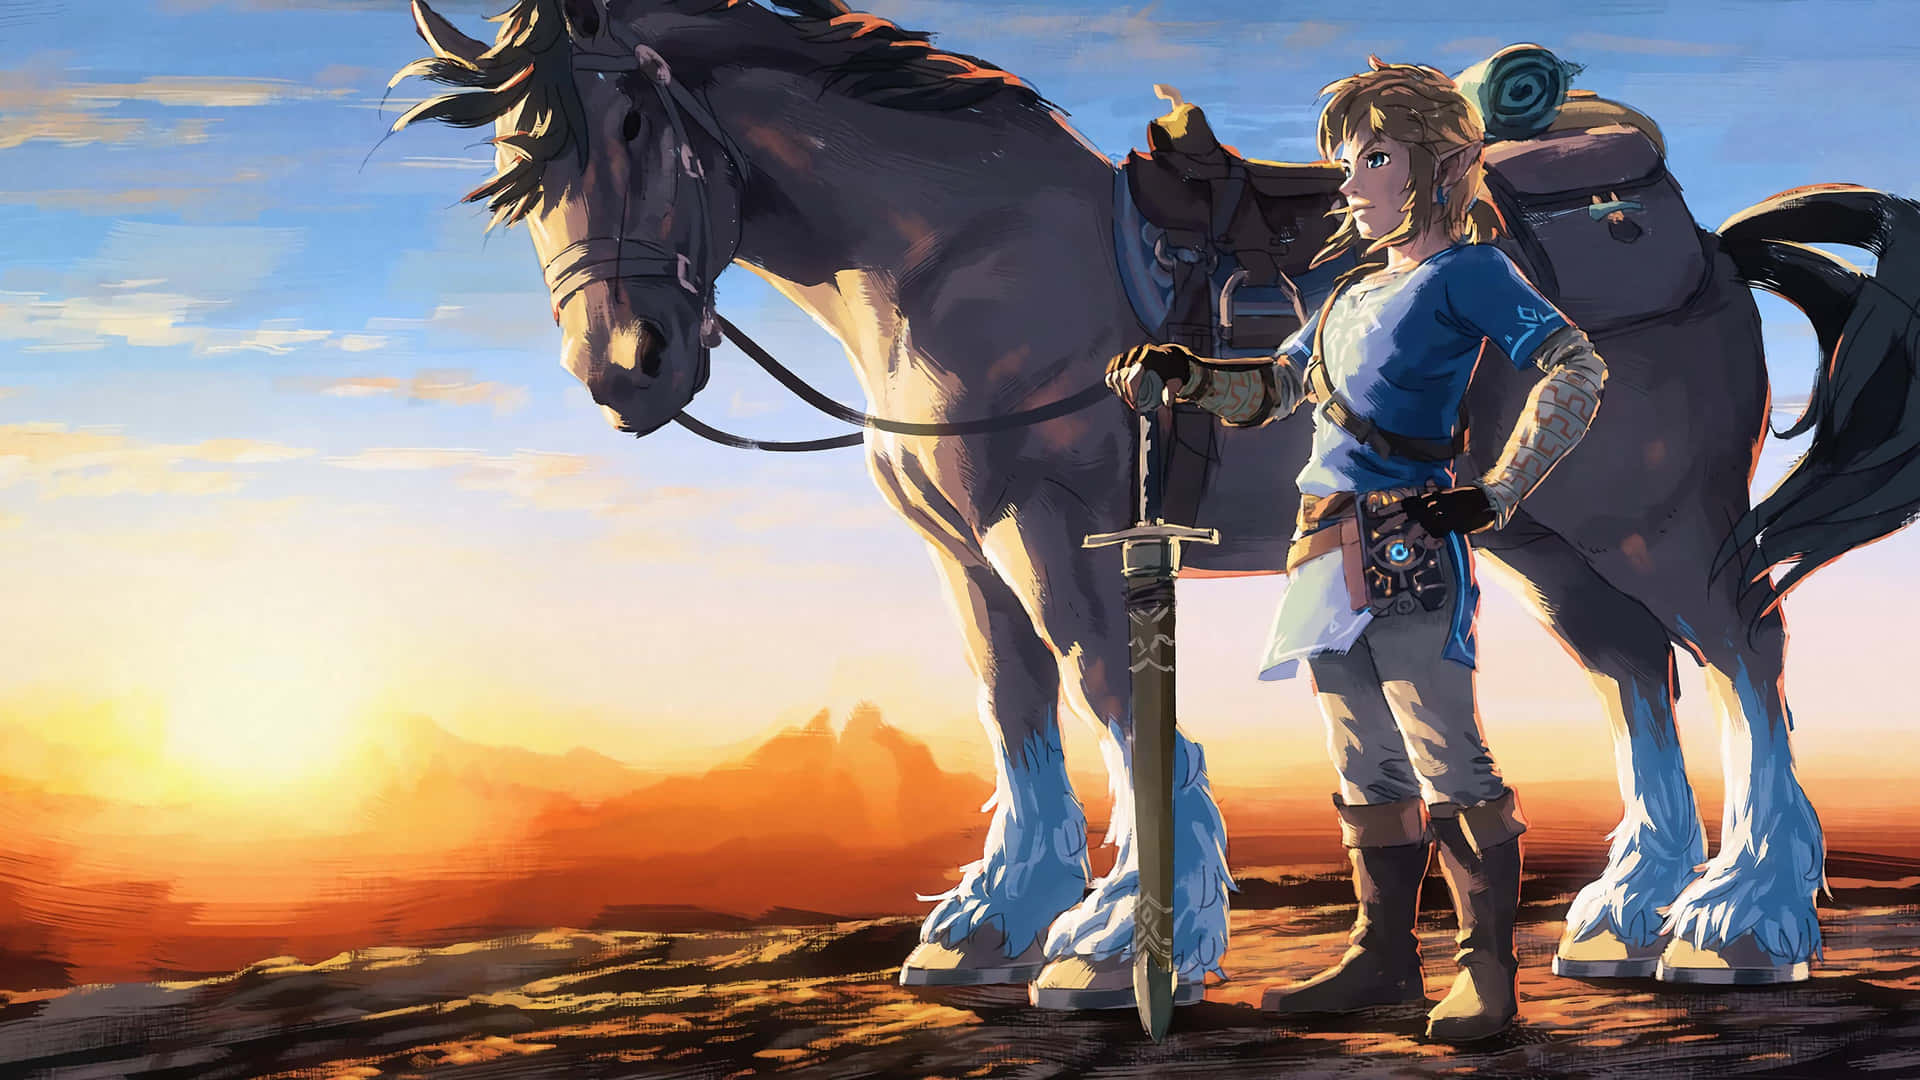 Explore the world of Hyrule in stunning 4K with The Legend of Zelda: Breath of the Wild. Wallpaper